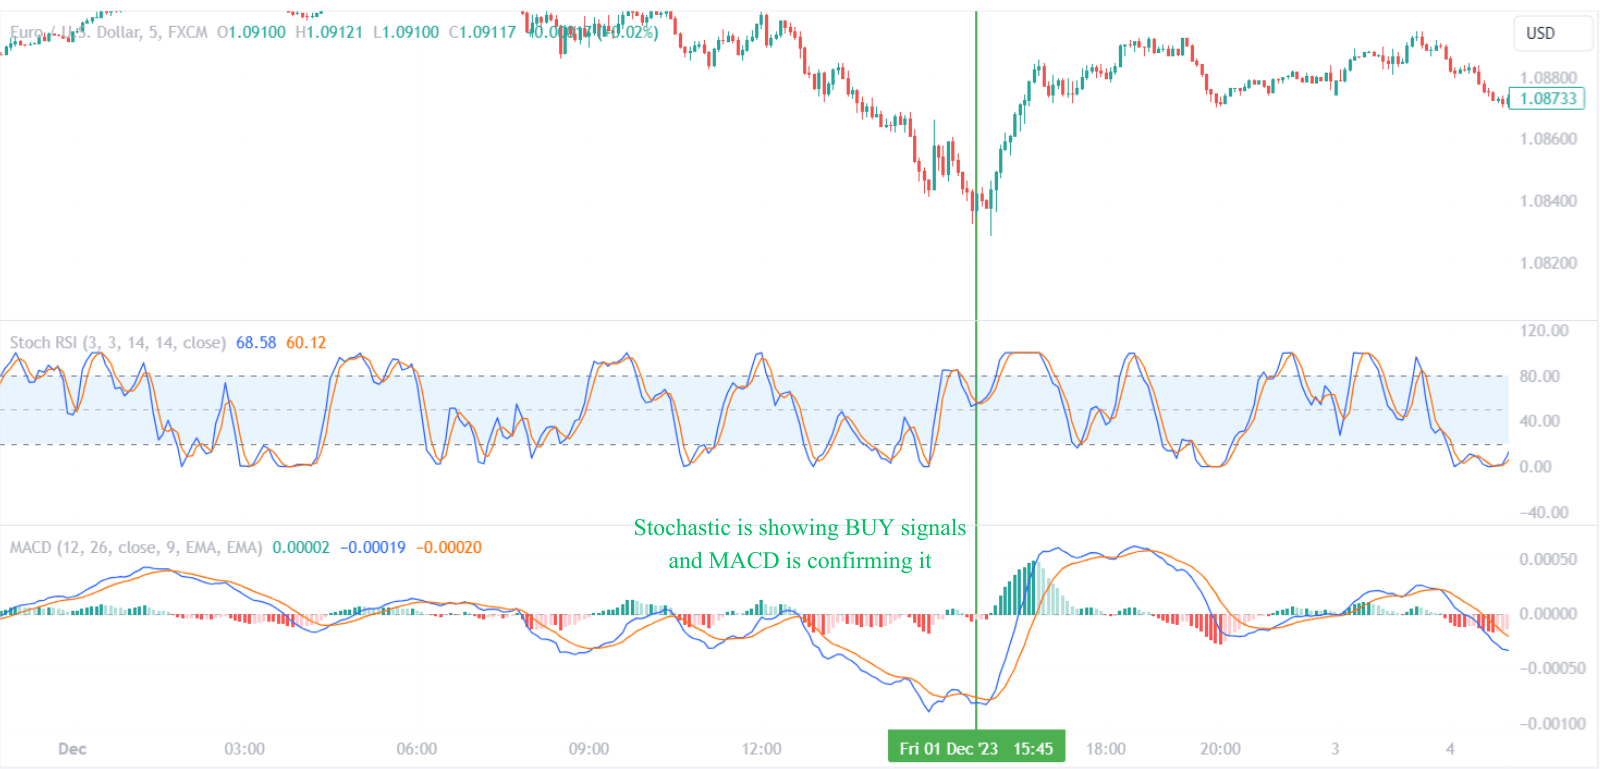 Stochastic RSI Combined With MACD